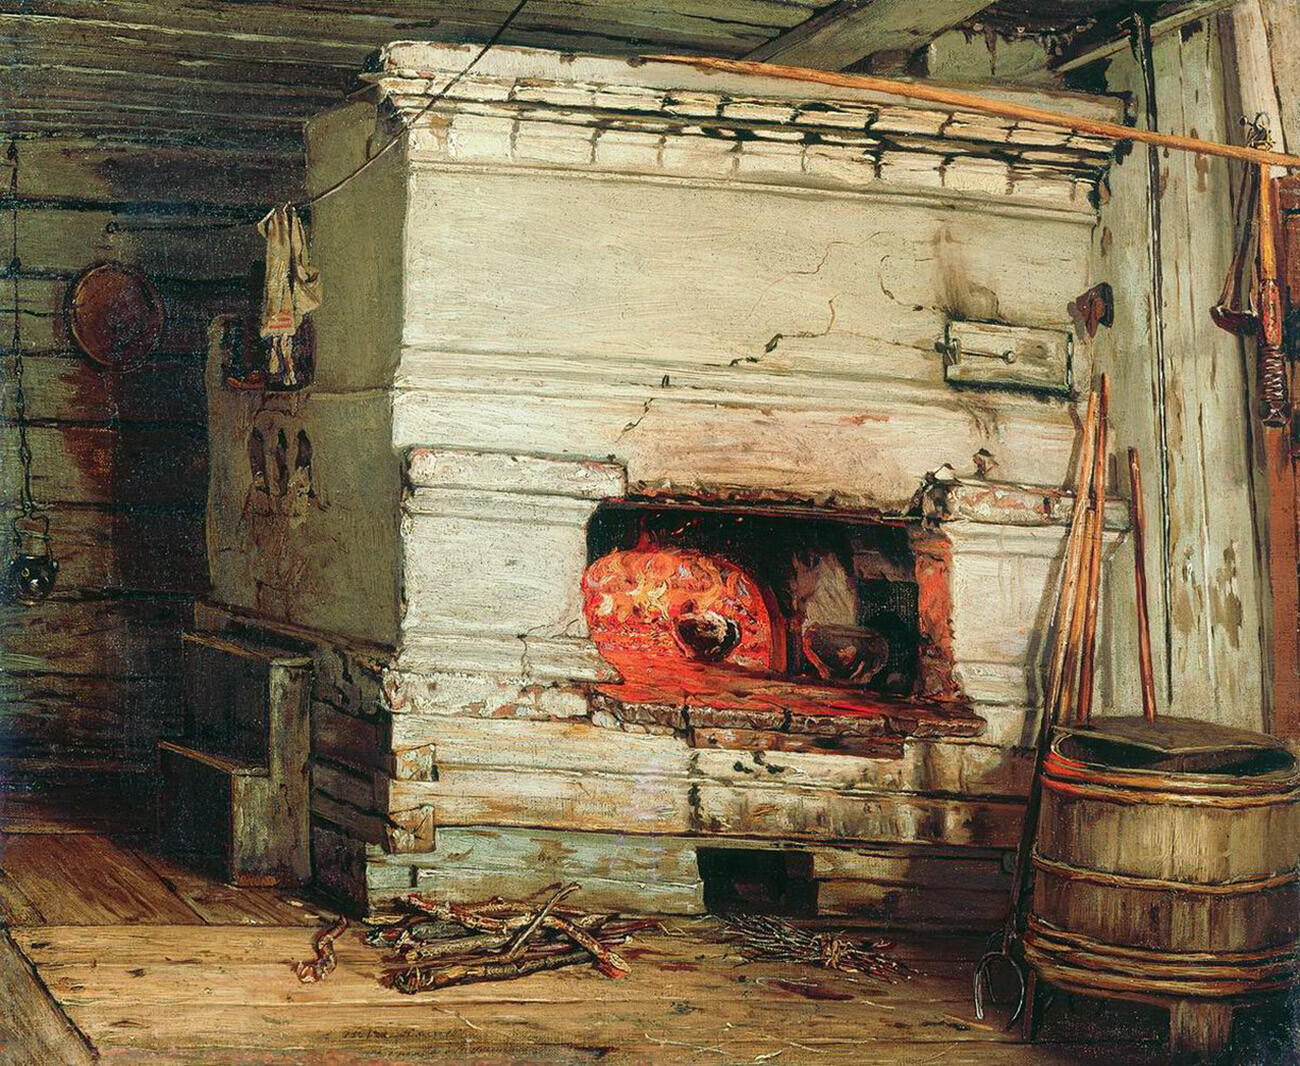 A peasant hut with a stove